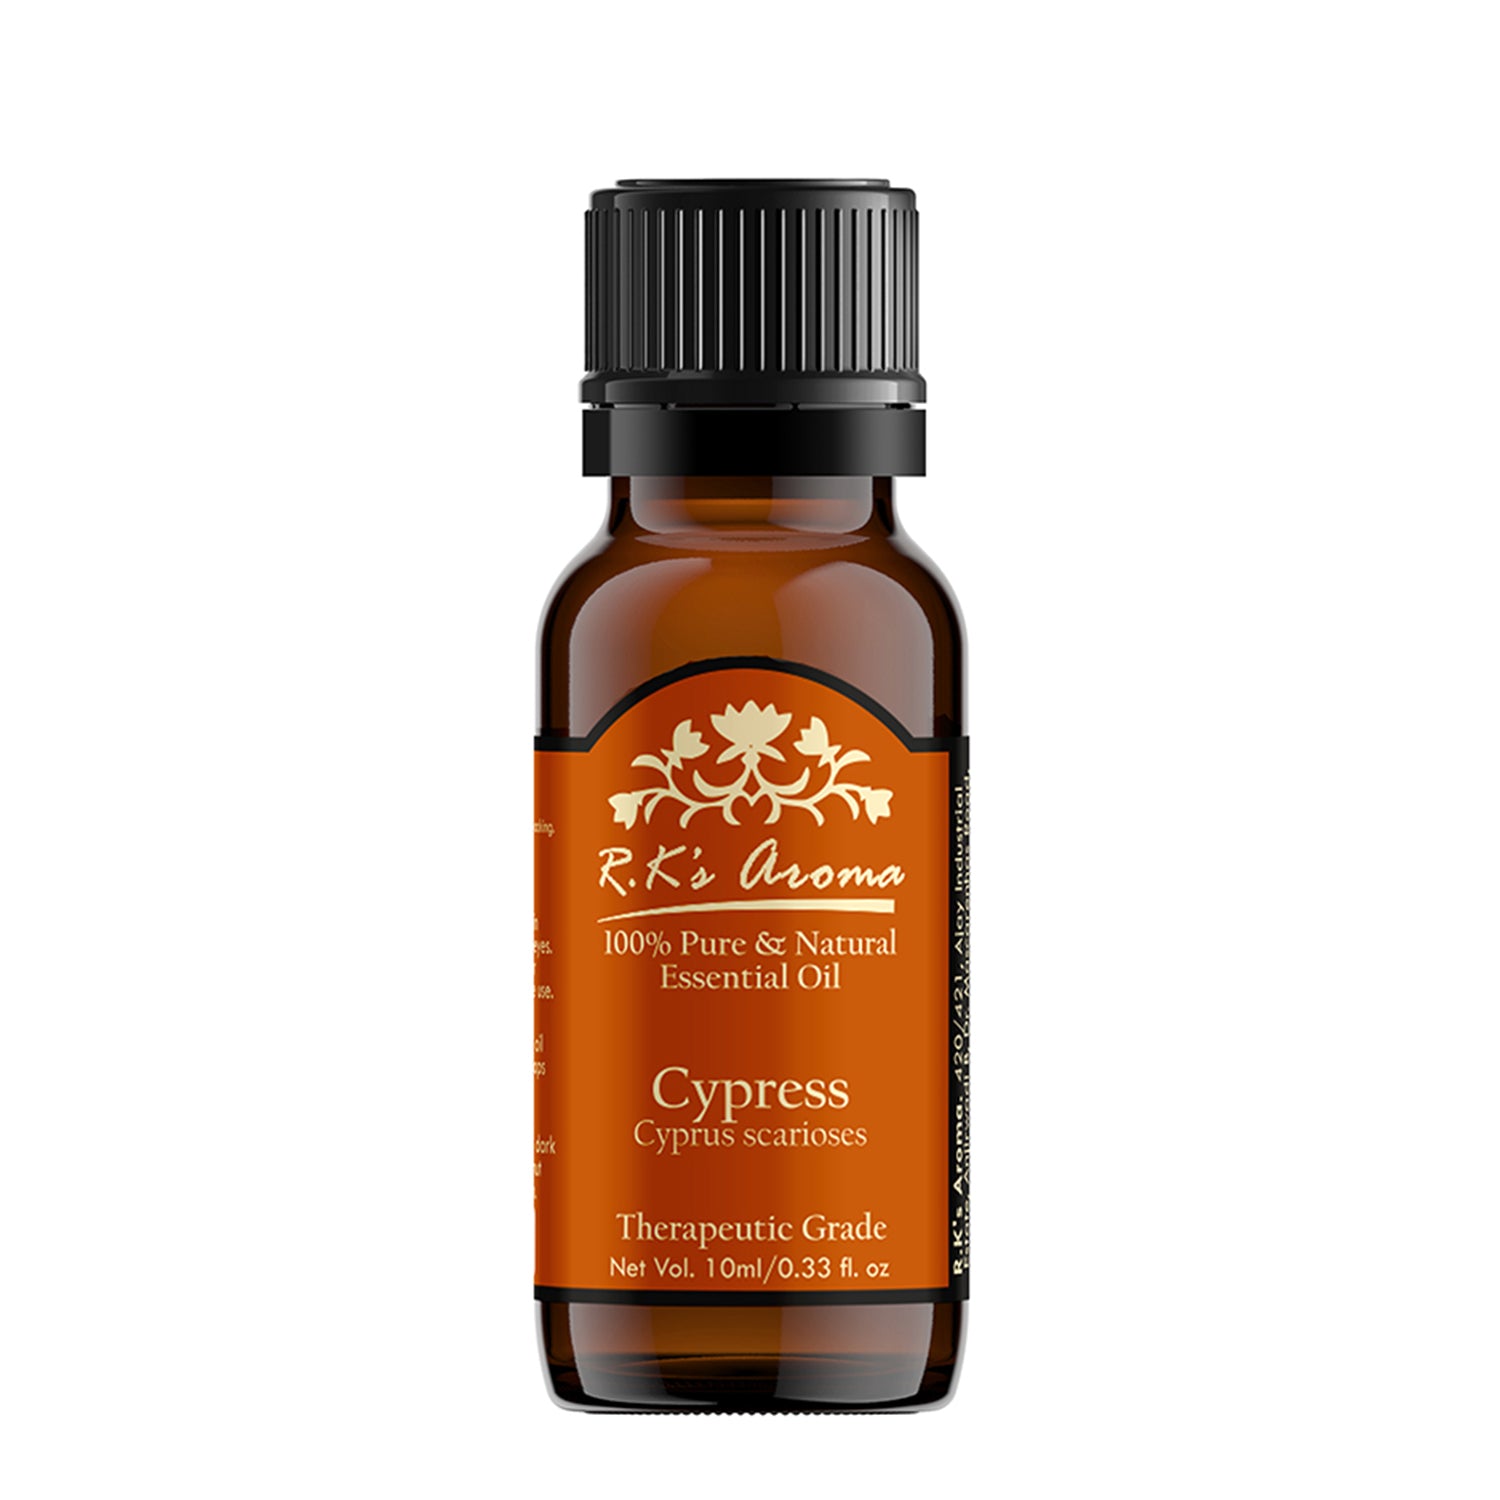 Cypress Essential Oil (Cyprus Scarioses)